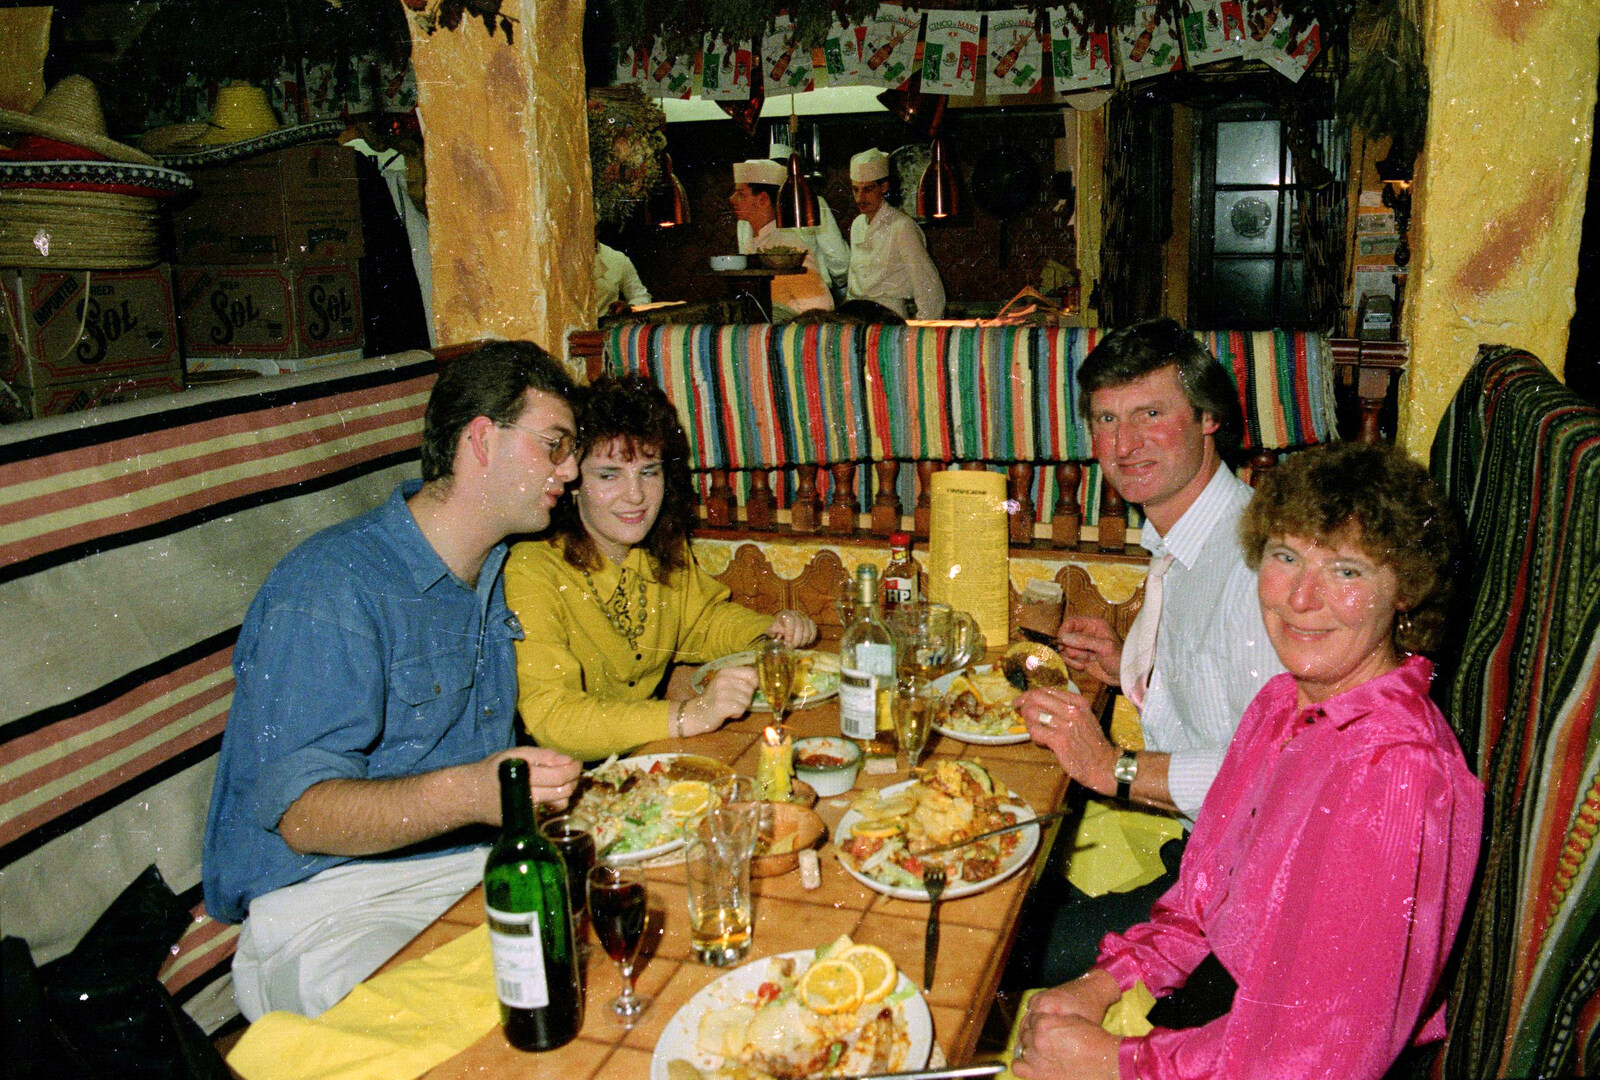 In Pedro's from Pedros and Daffodils, Norwich and Billingford, Norfolk - 20th April 1991